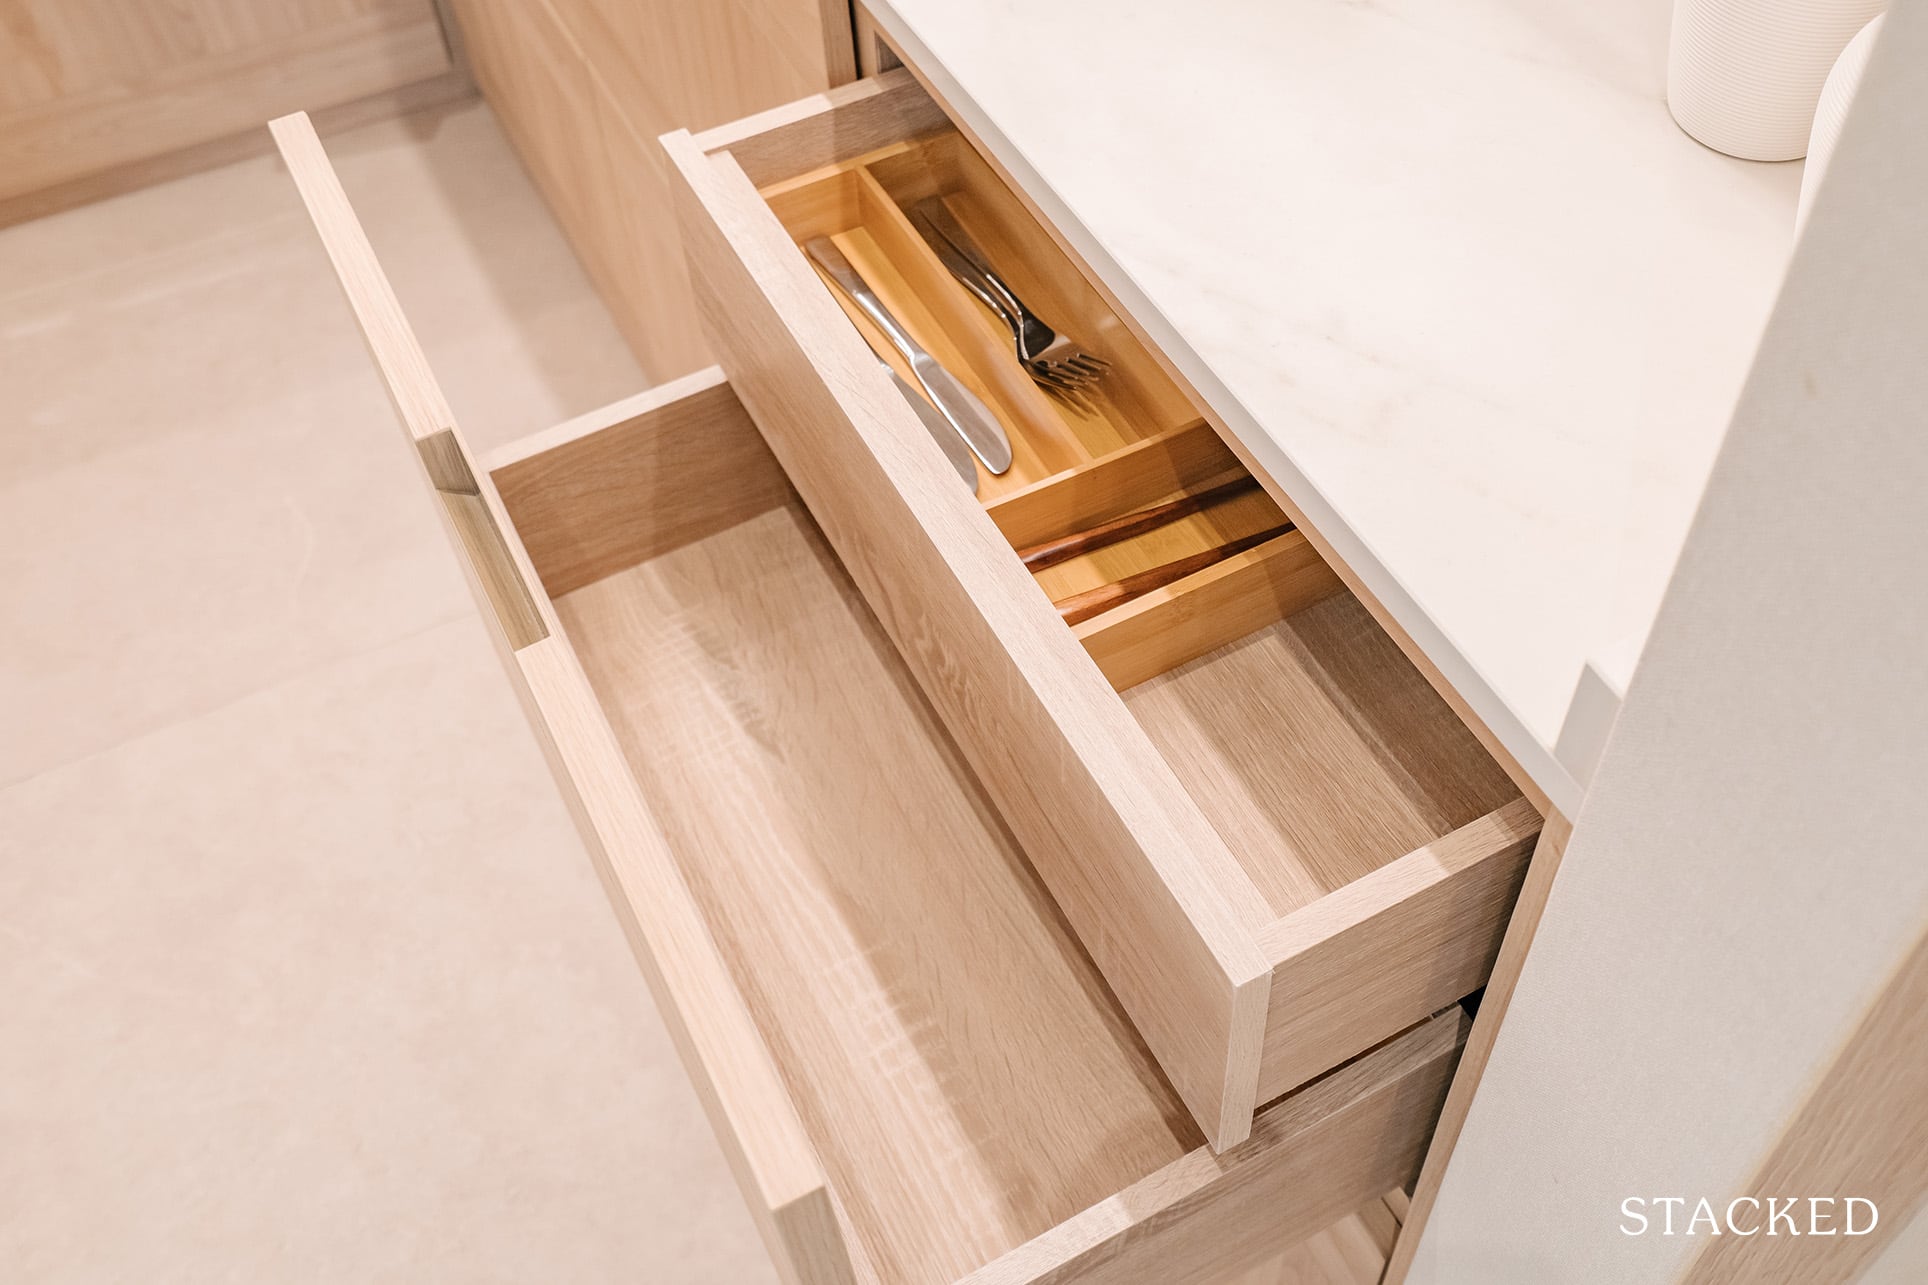 atlassia 2 bedroom drawer compartments